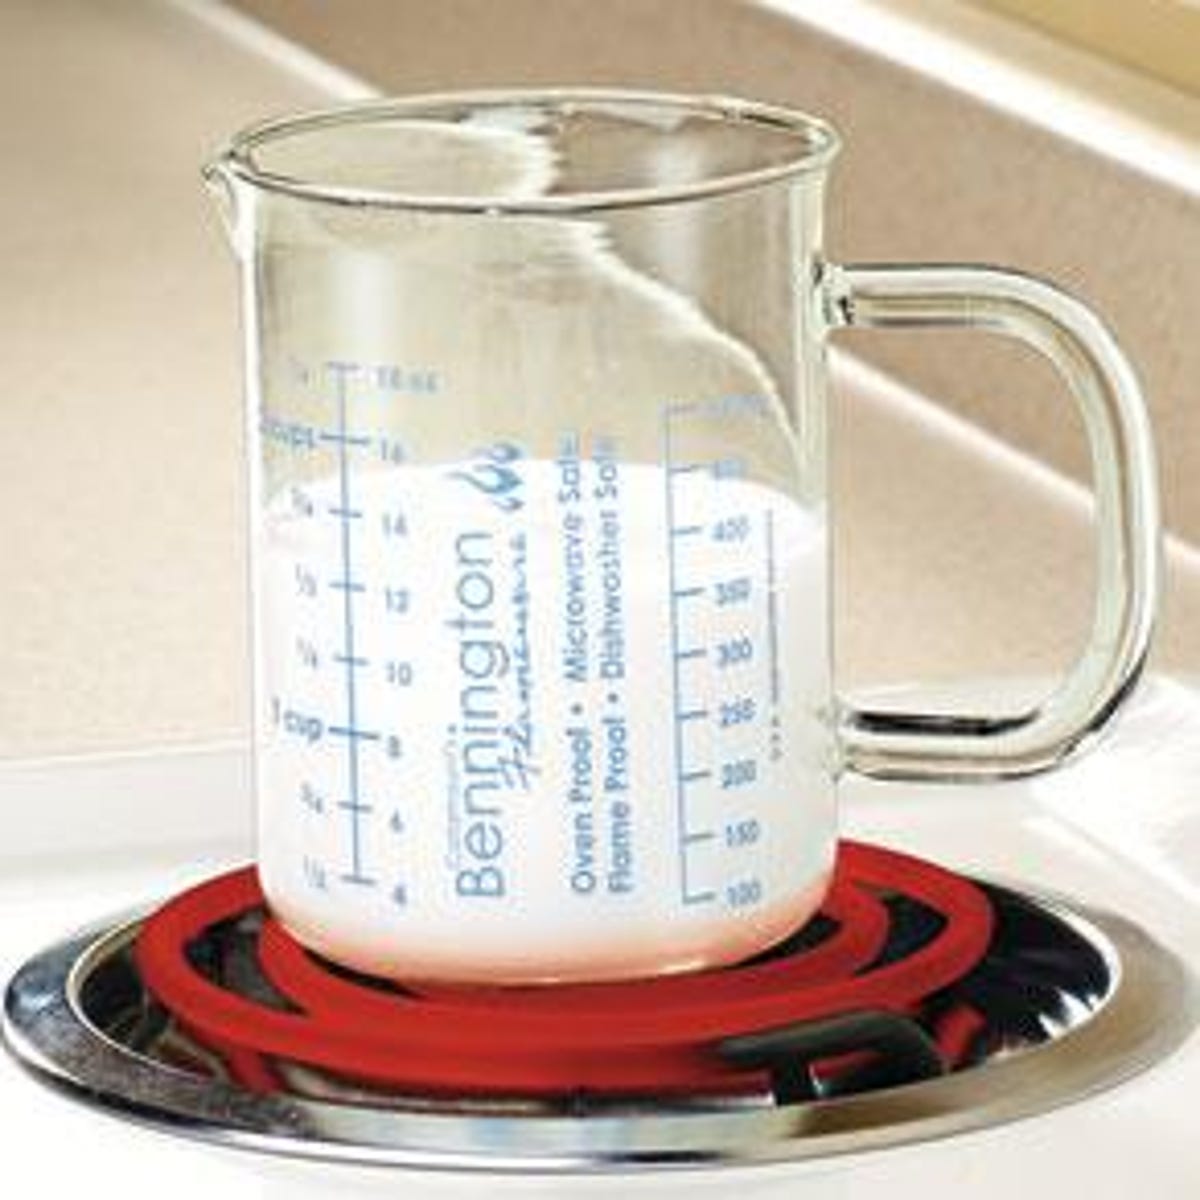 Measure and heat in one cup - CNET